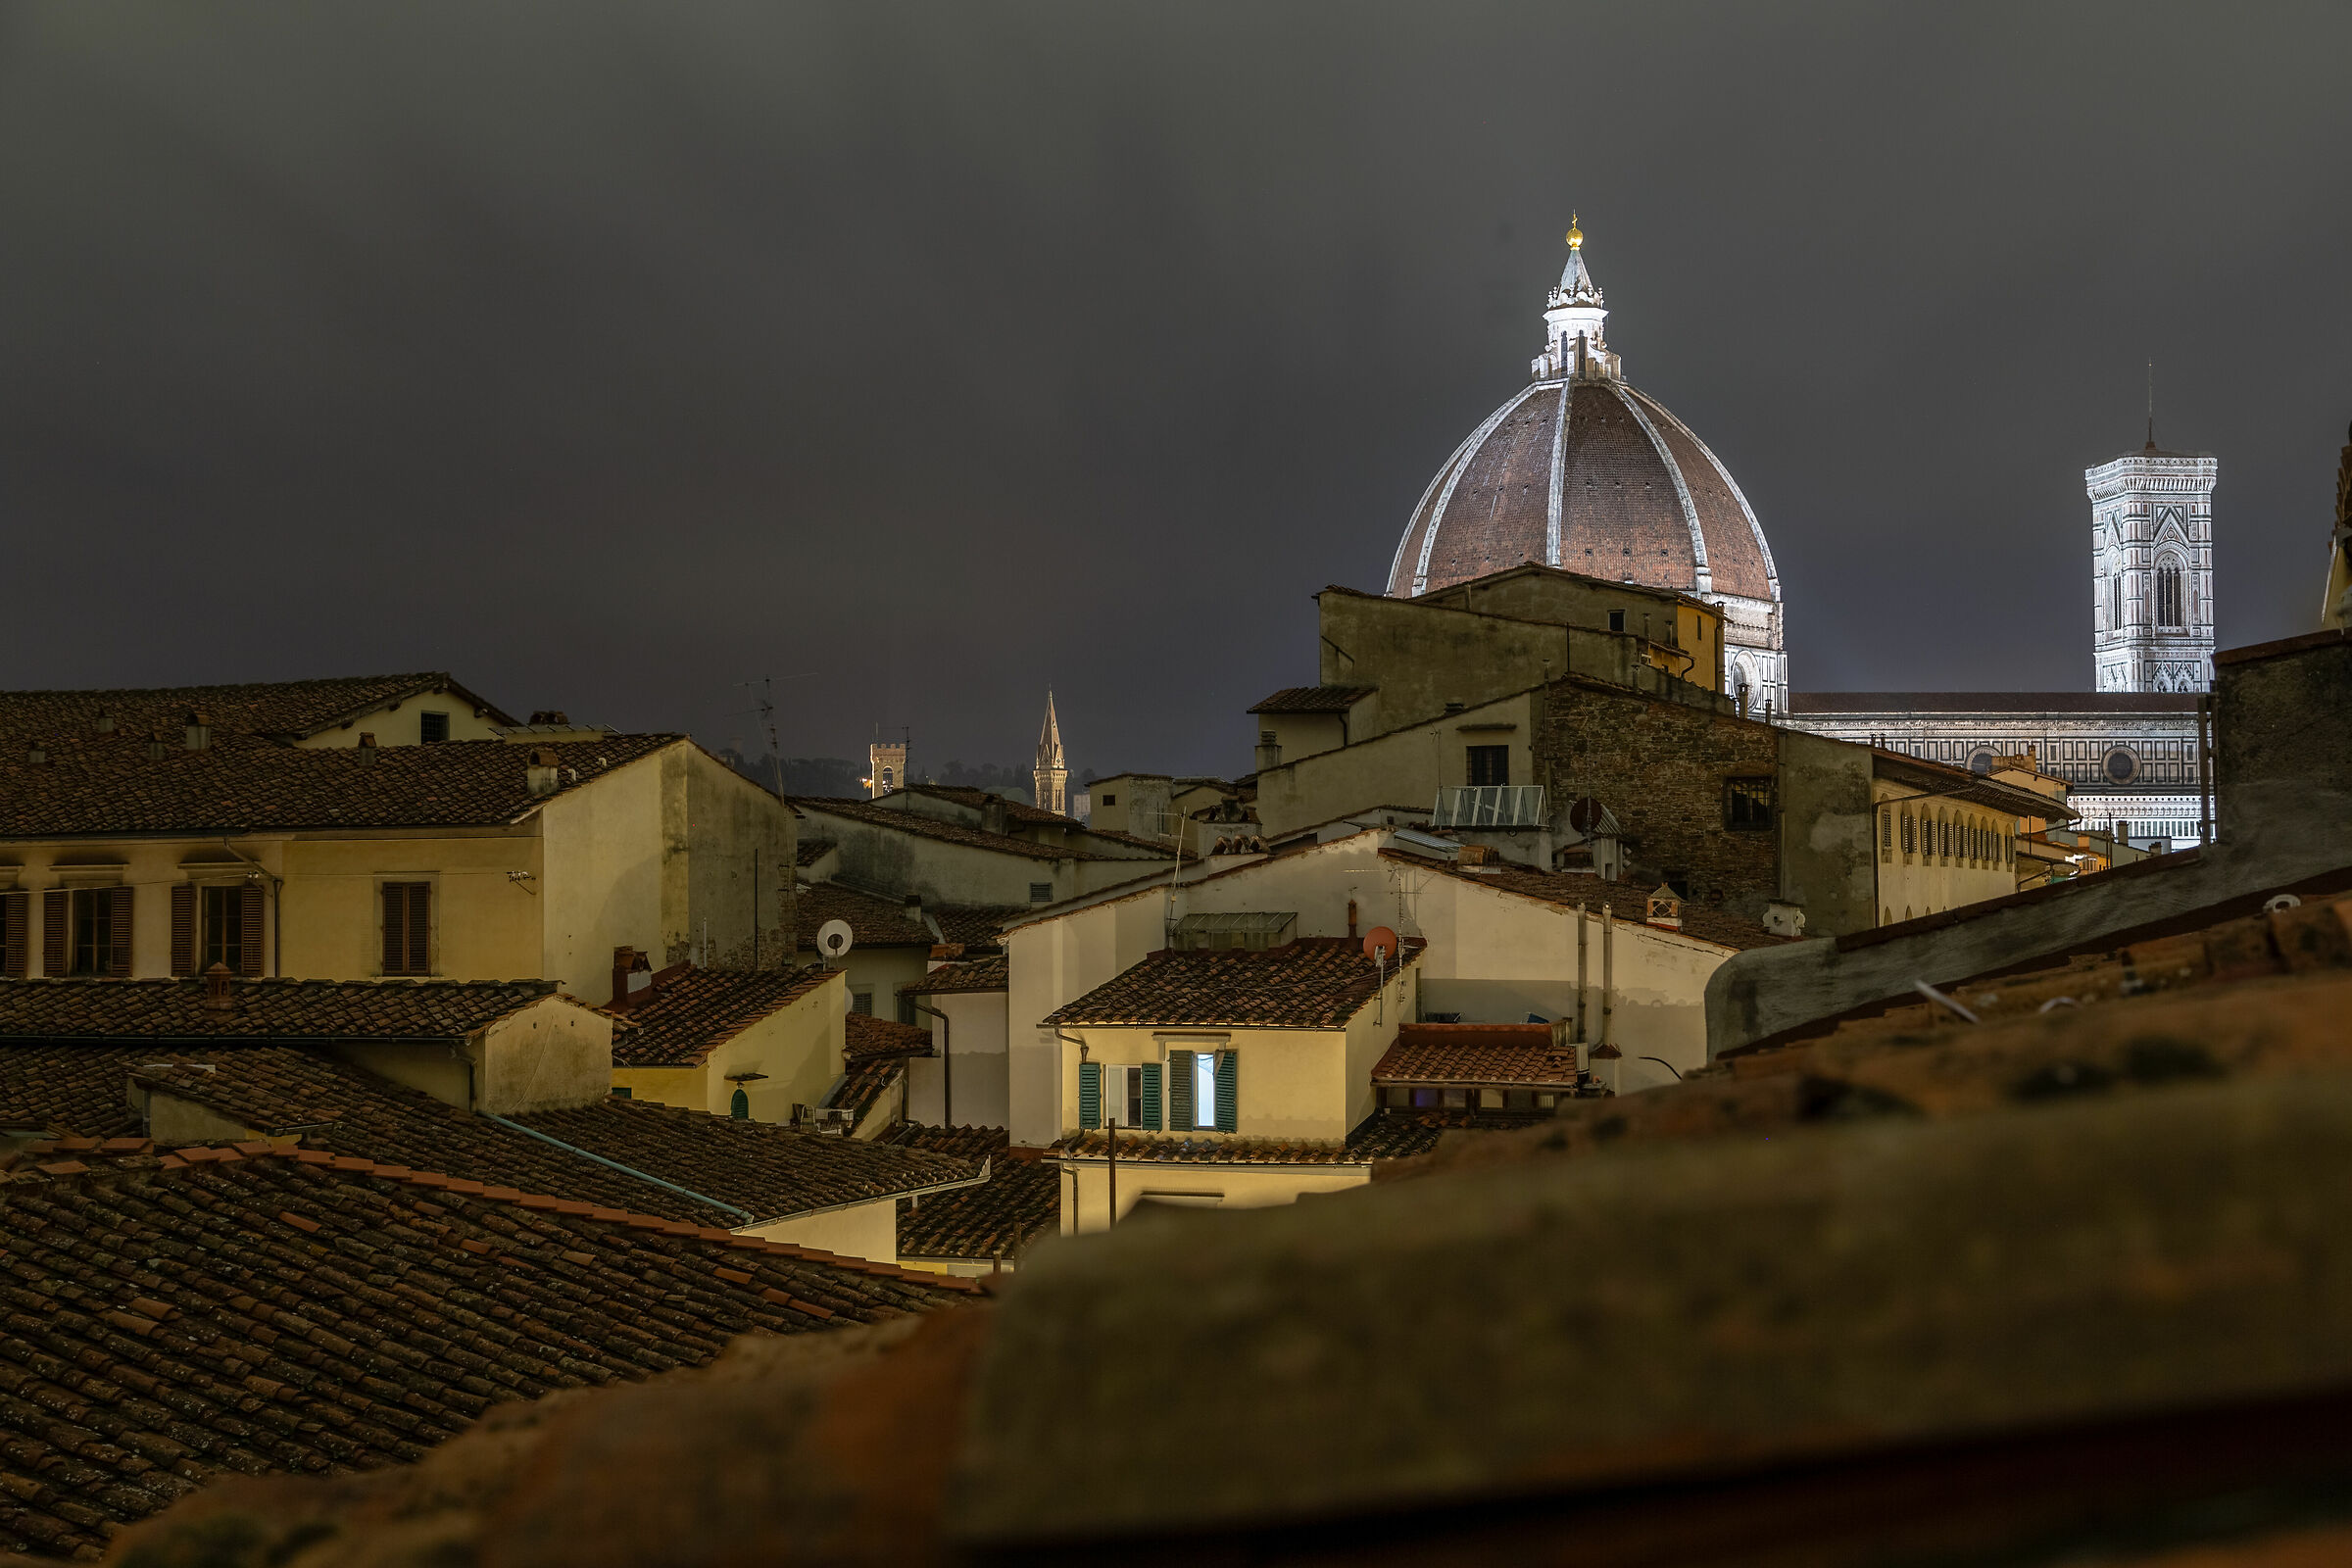 Florence by night seen from the rooftops...